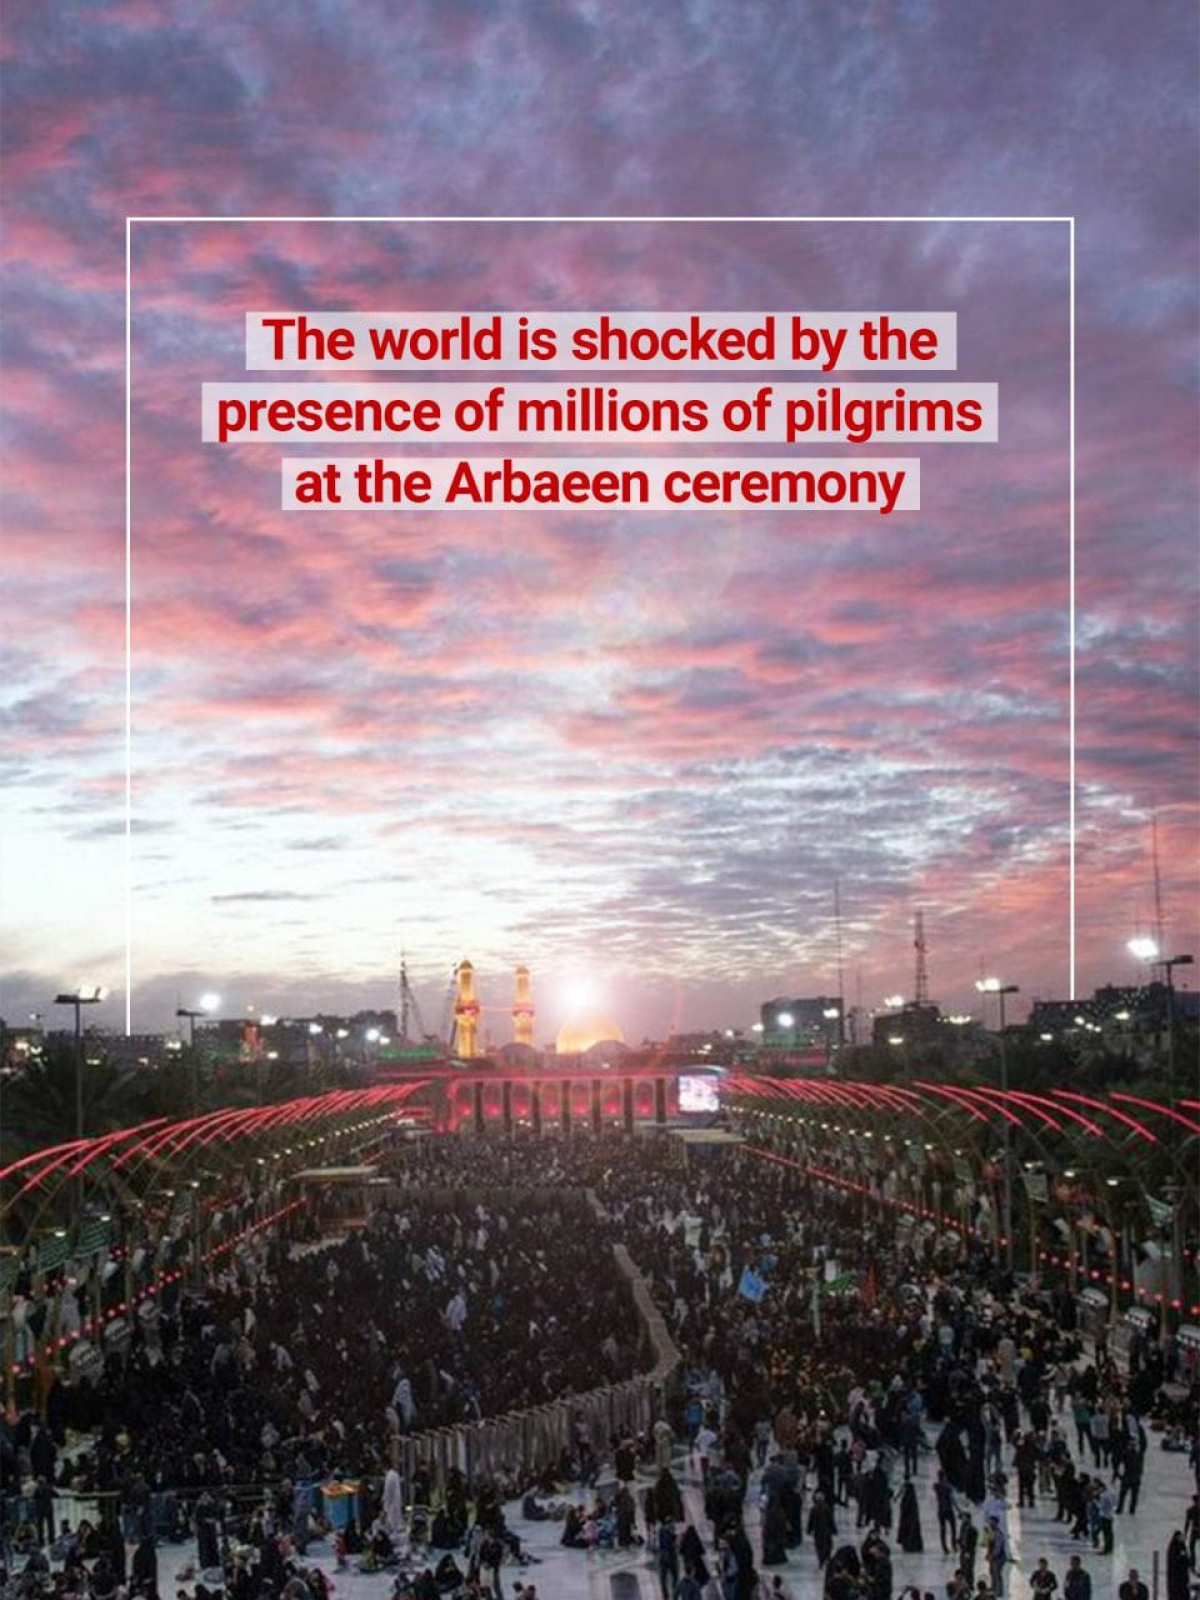 The world is shocked by the presence of millions of pilgrims at the Arbaeen ceremony